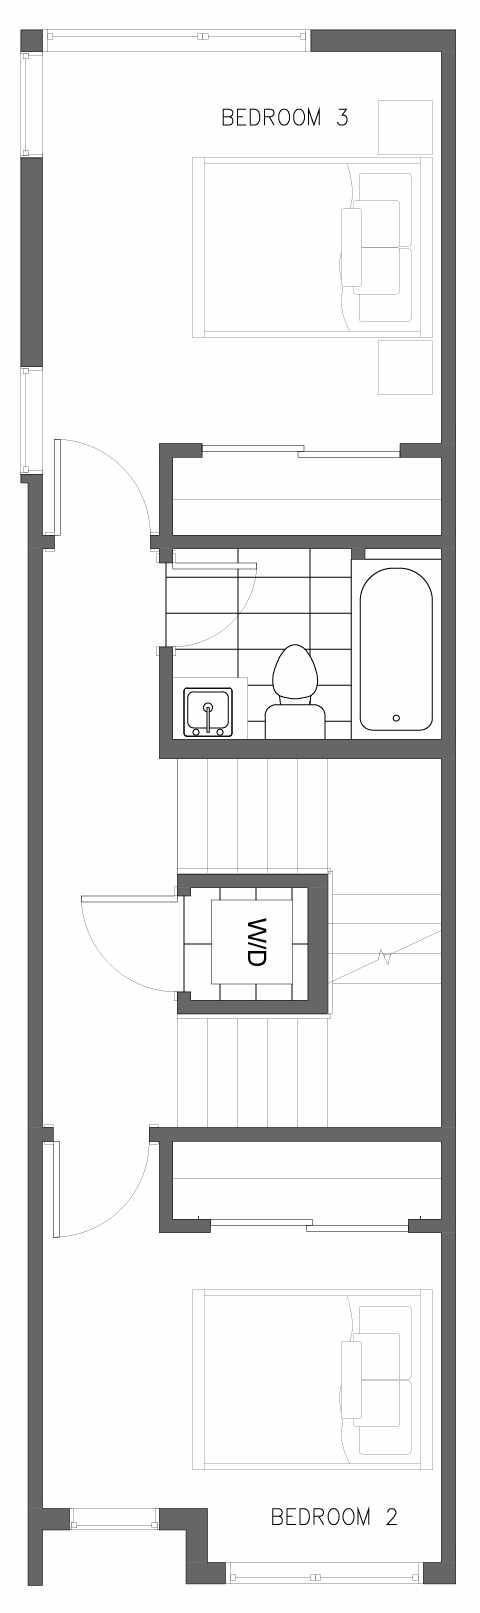 Second Floor Plan of 5610 NE 60th St., One of the Kendal Townhomes in Windermere by Isola Homes